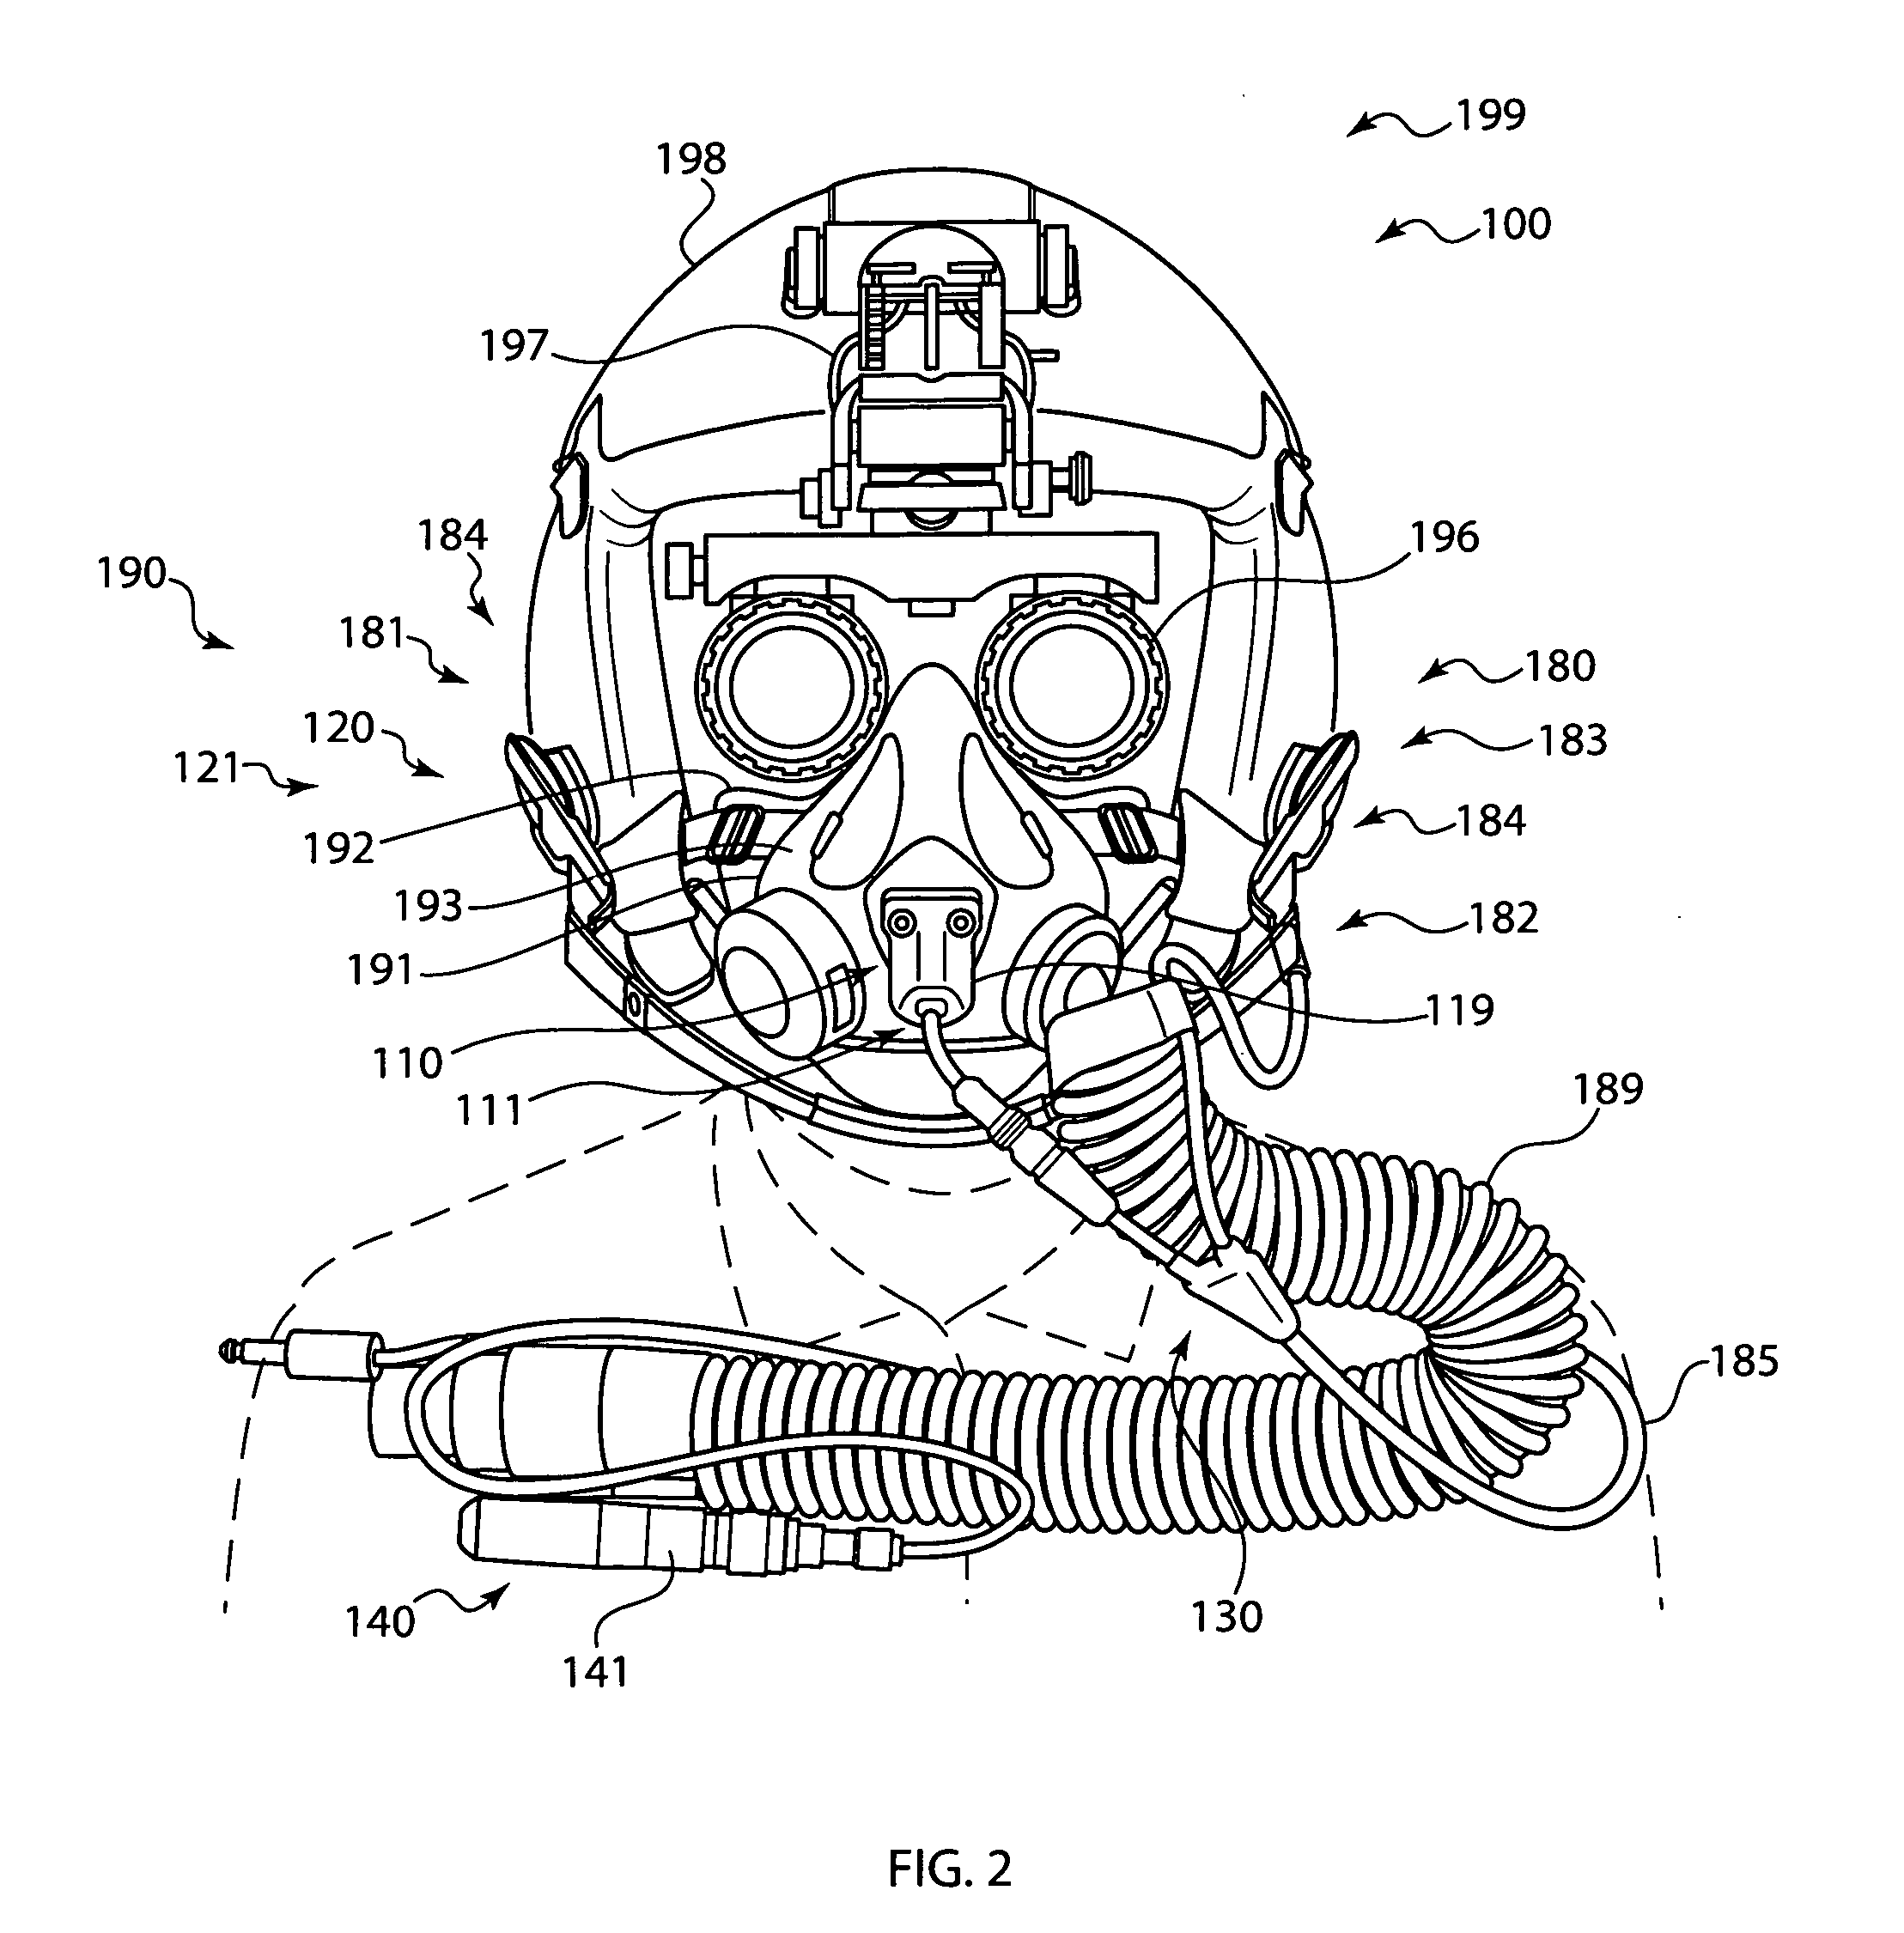 Integrated control circuit for an oxygen mask